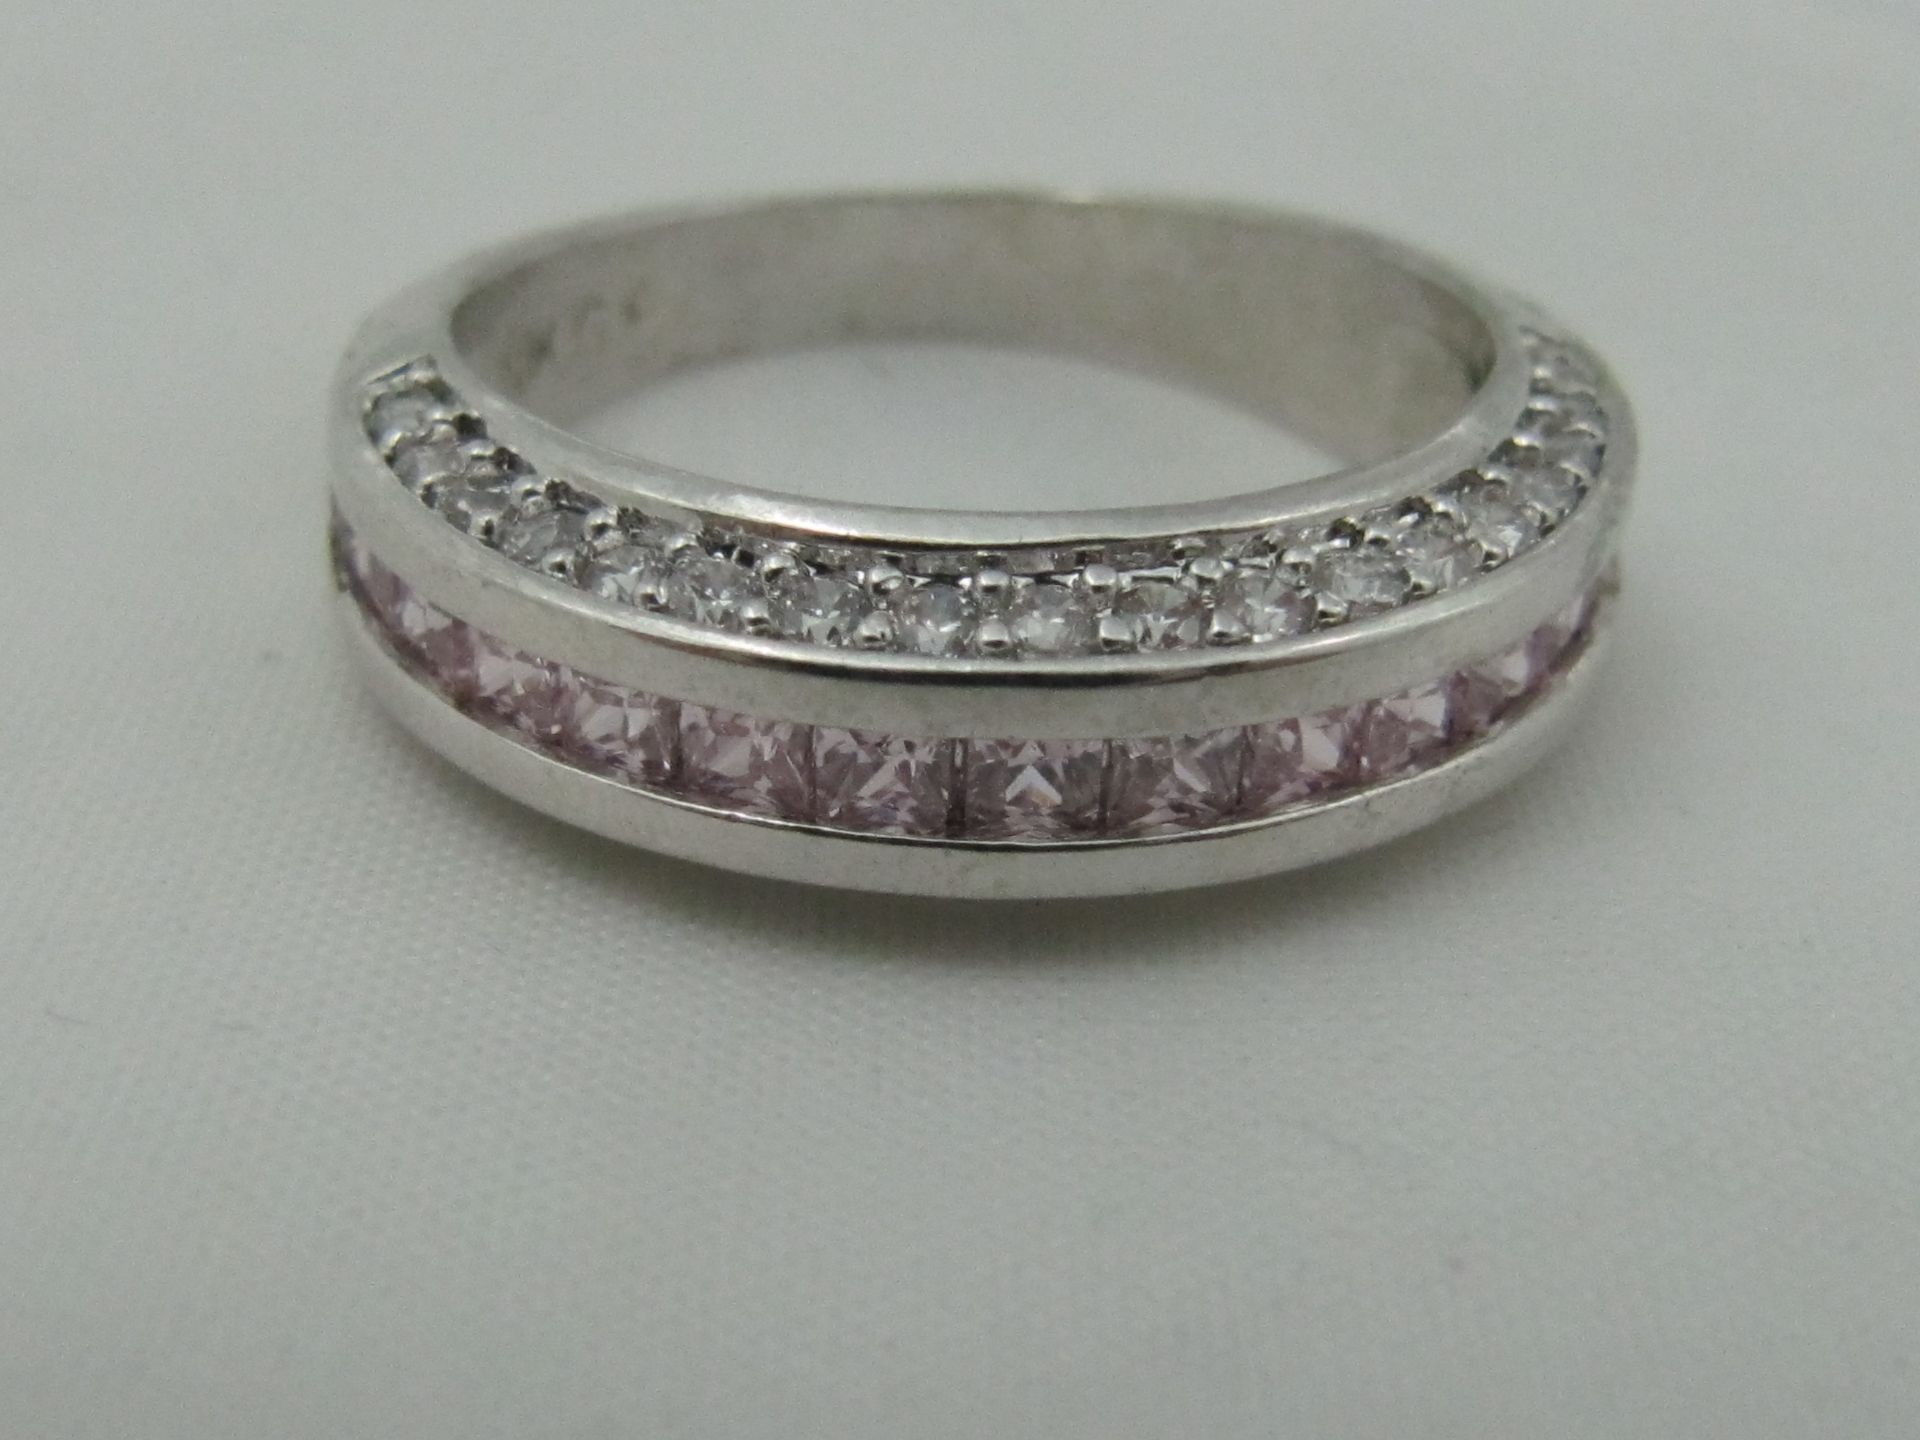 10k White Gold Filled with Pink Sapphires. Size Q.